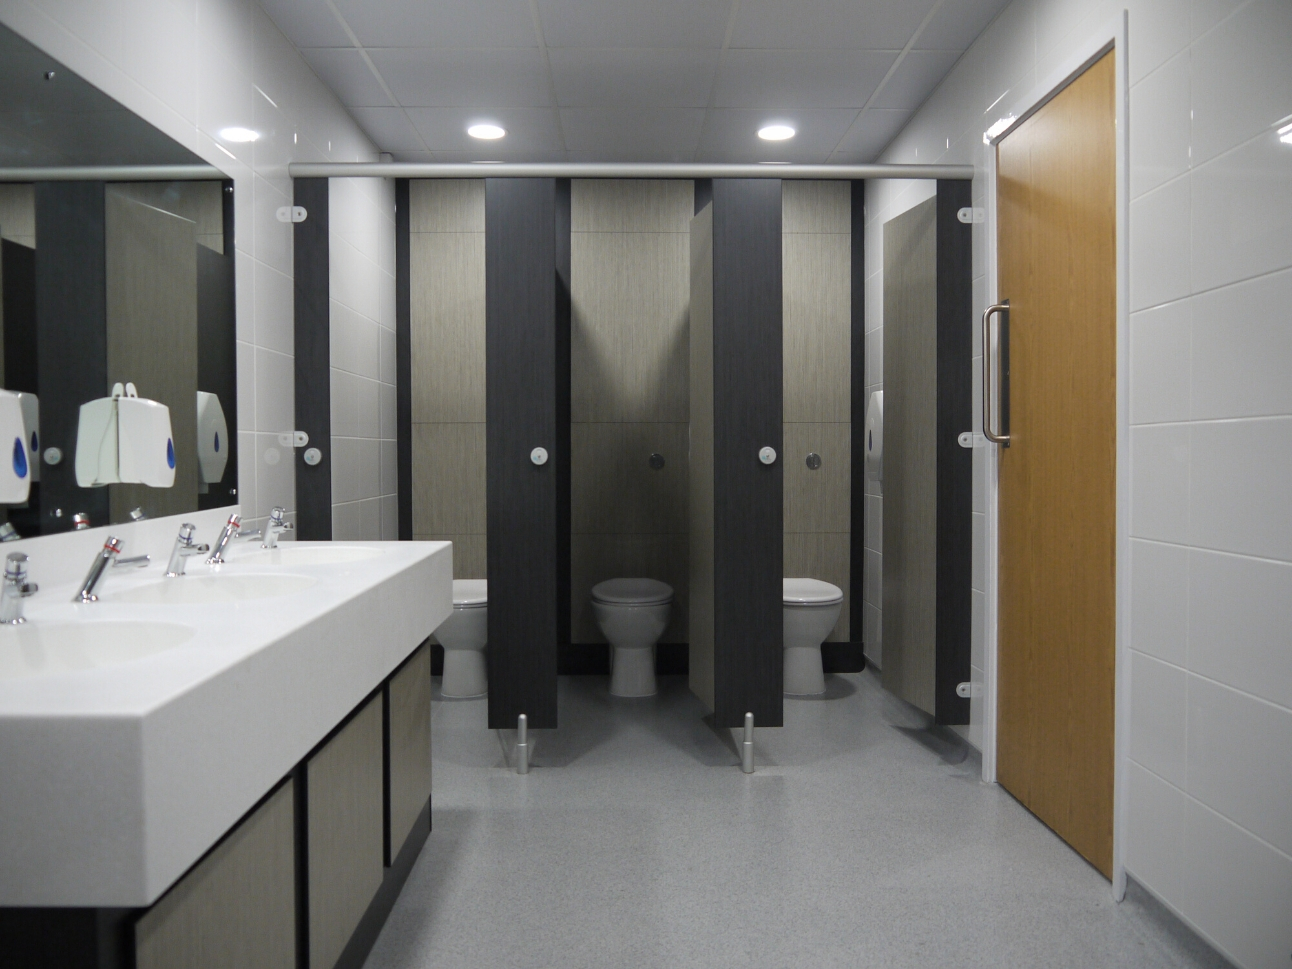 Ansford Academy School | Case Study | Commercial Washrooms